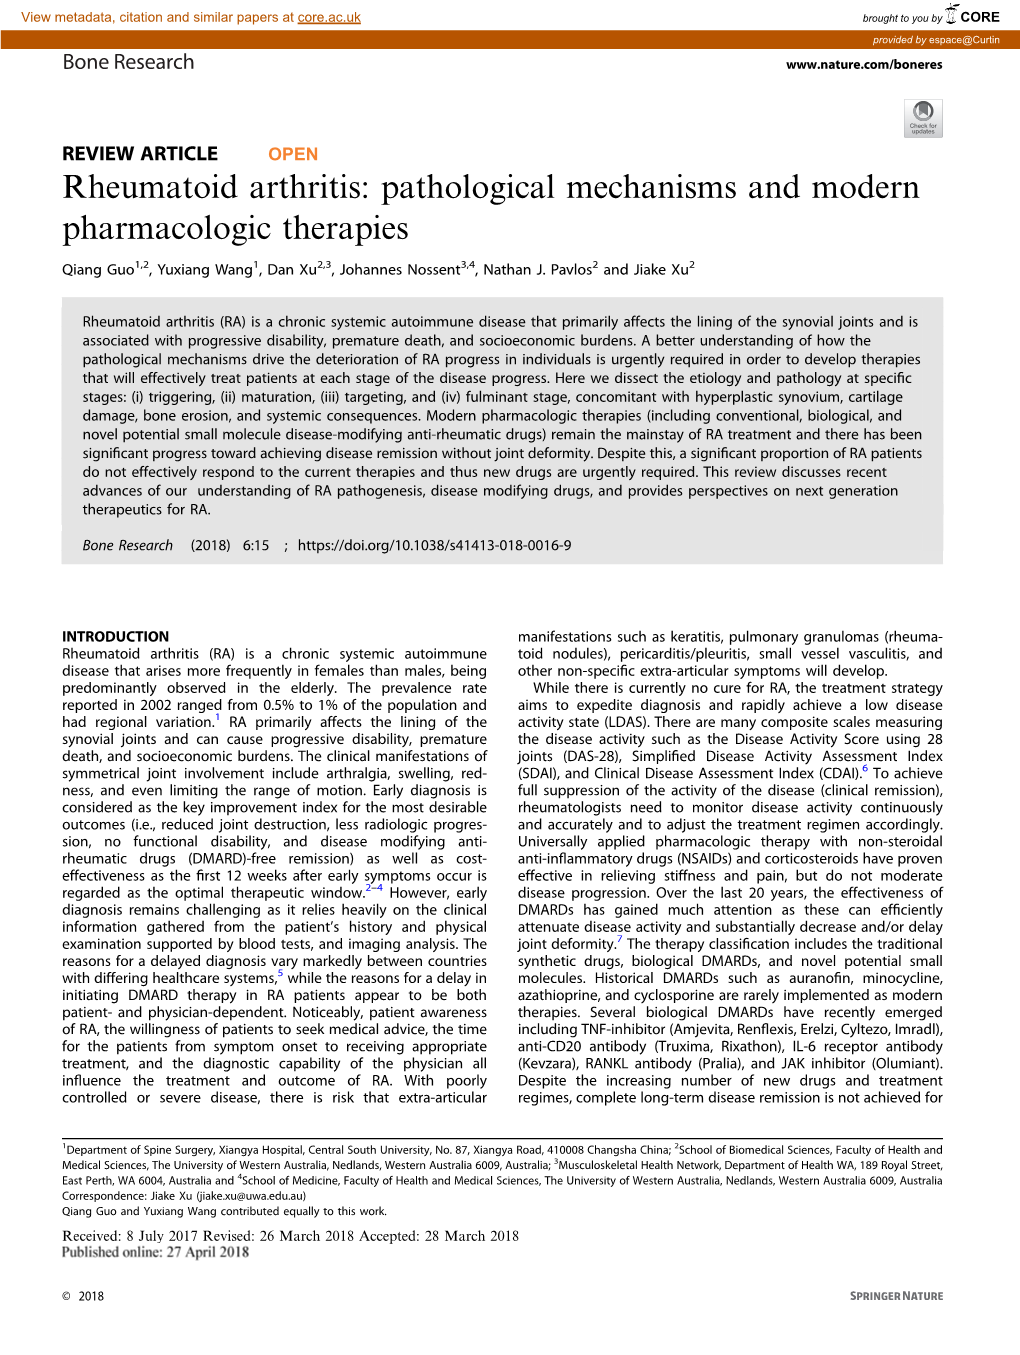 Pathological Mechanisms and Modern Pharmacologic Therapies